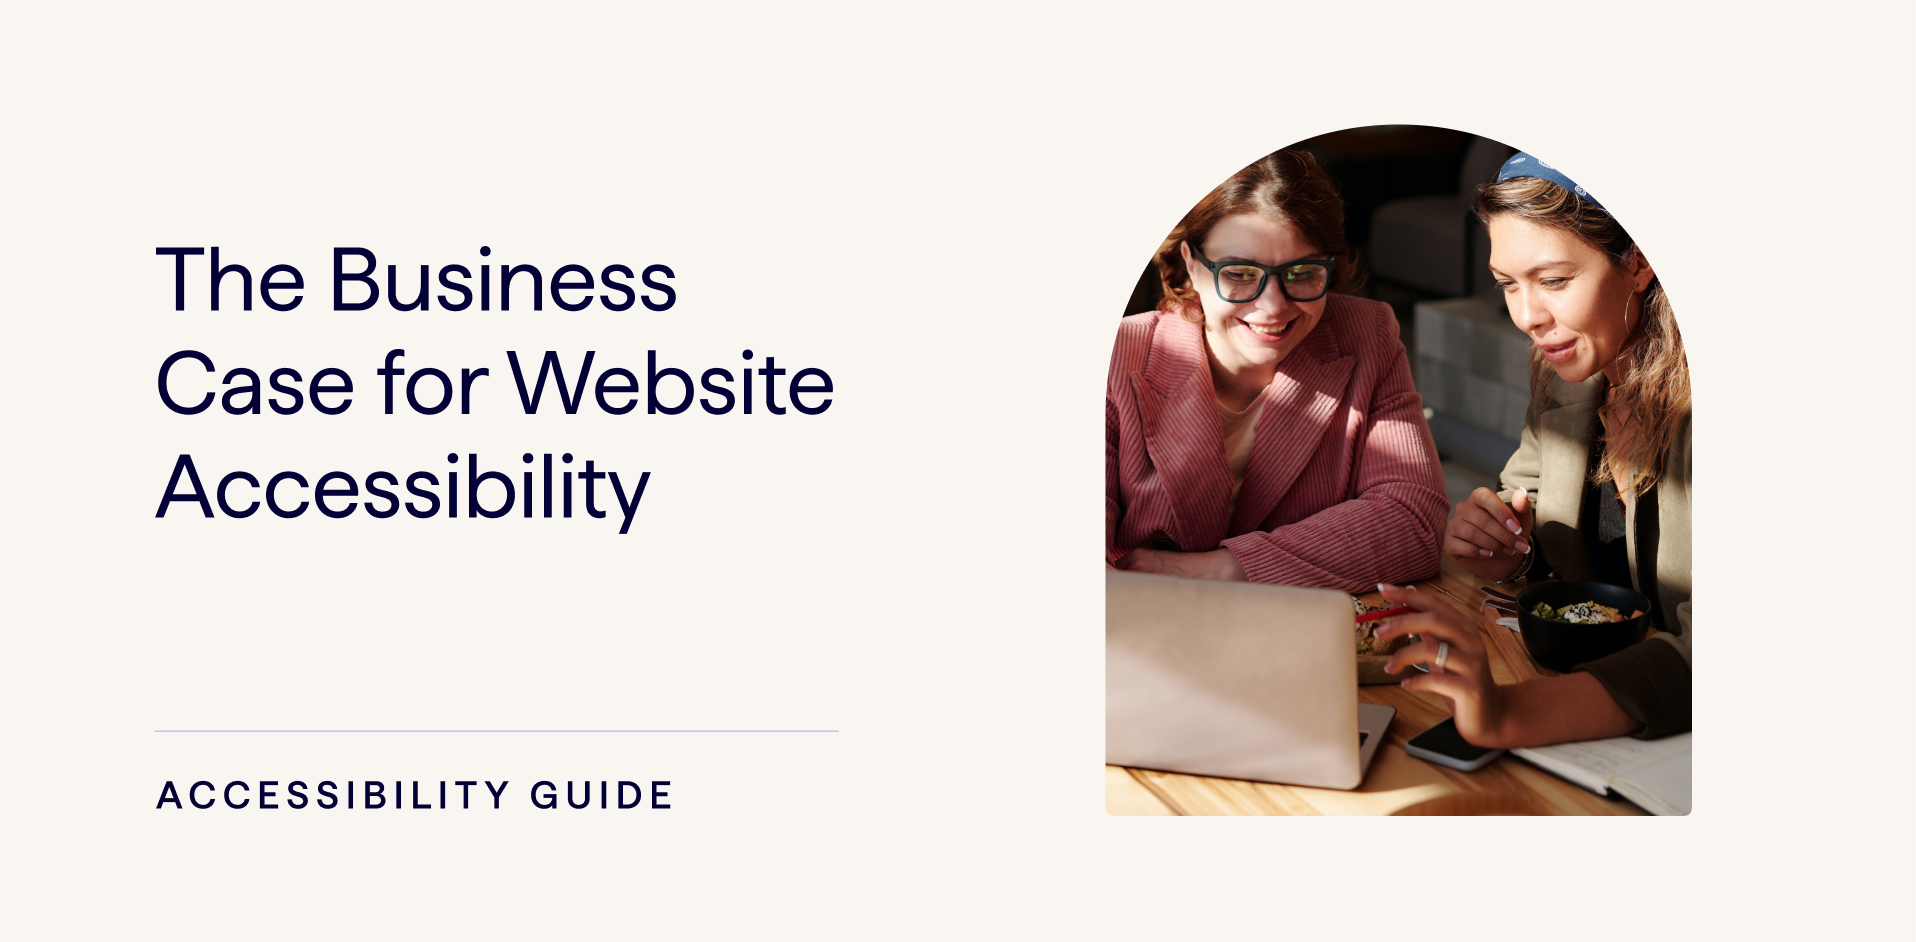 social The Business Case for Website Accessibility 2